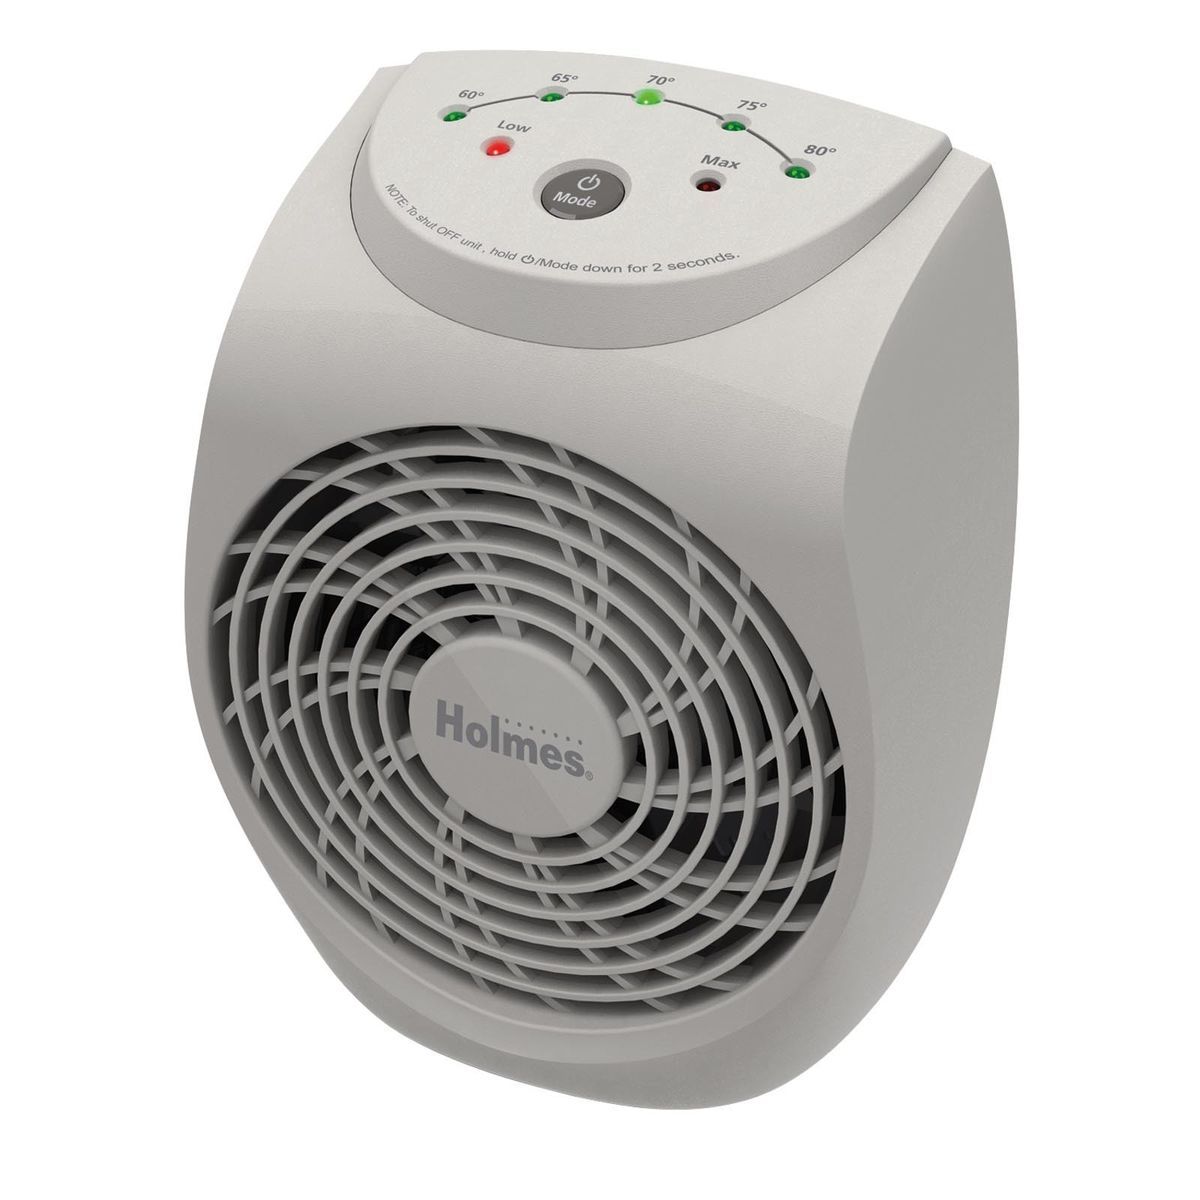 Holmes Hfh136 Tg Compact Heater Fan With 1touch Controls On Popscreen